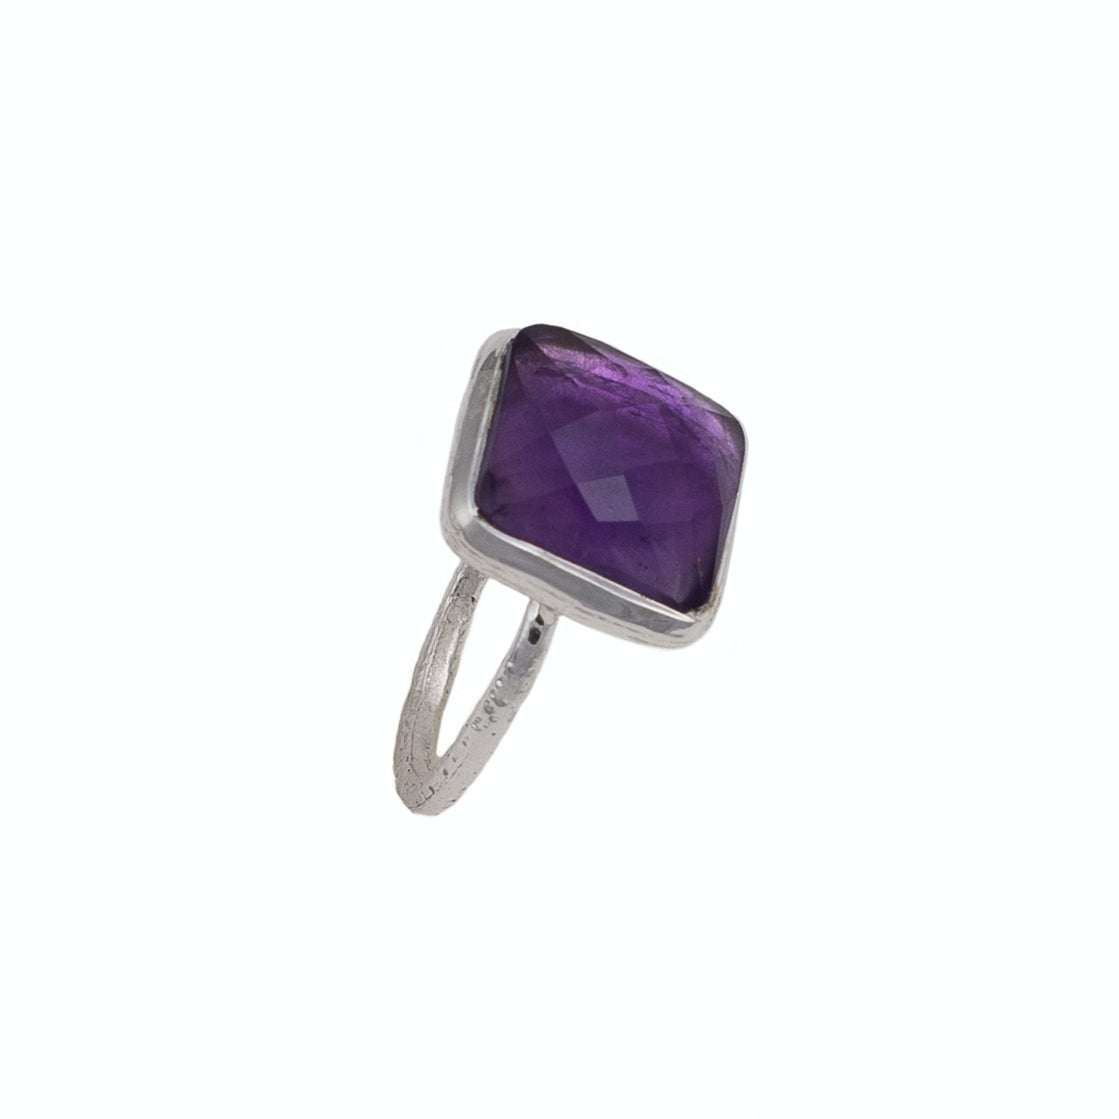 Silver Ring with Square Semiprecious Stone - Amethyst